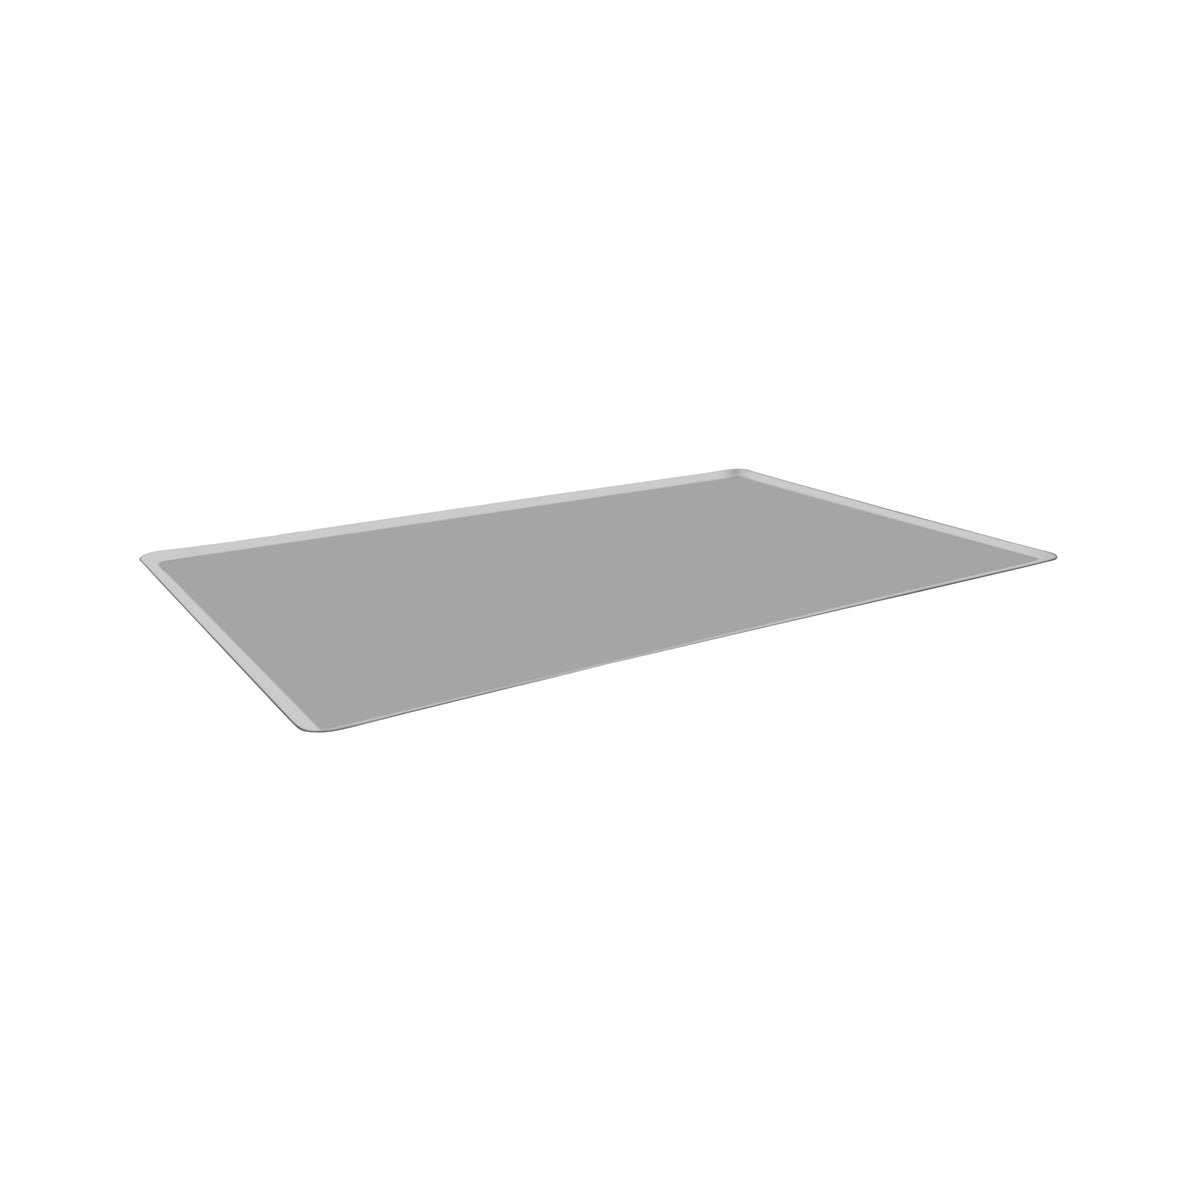 37331 Guery Baking Sheet Stainless Steel Small Edge 600x400mm Tomkin Australia Hospitality Supplies